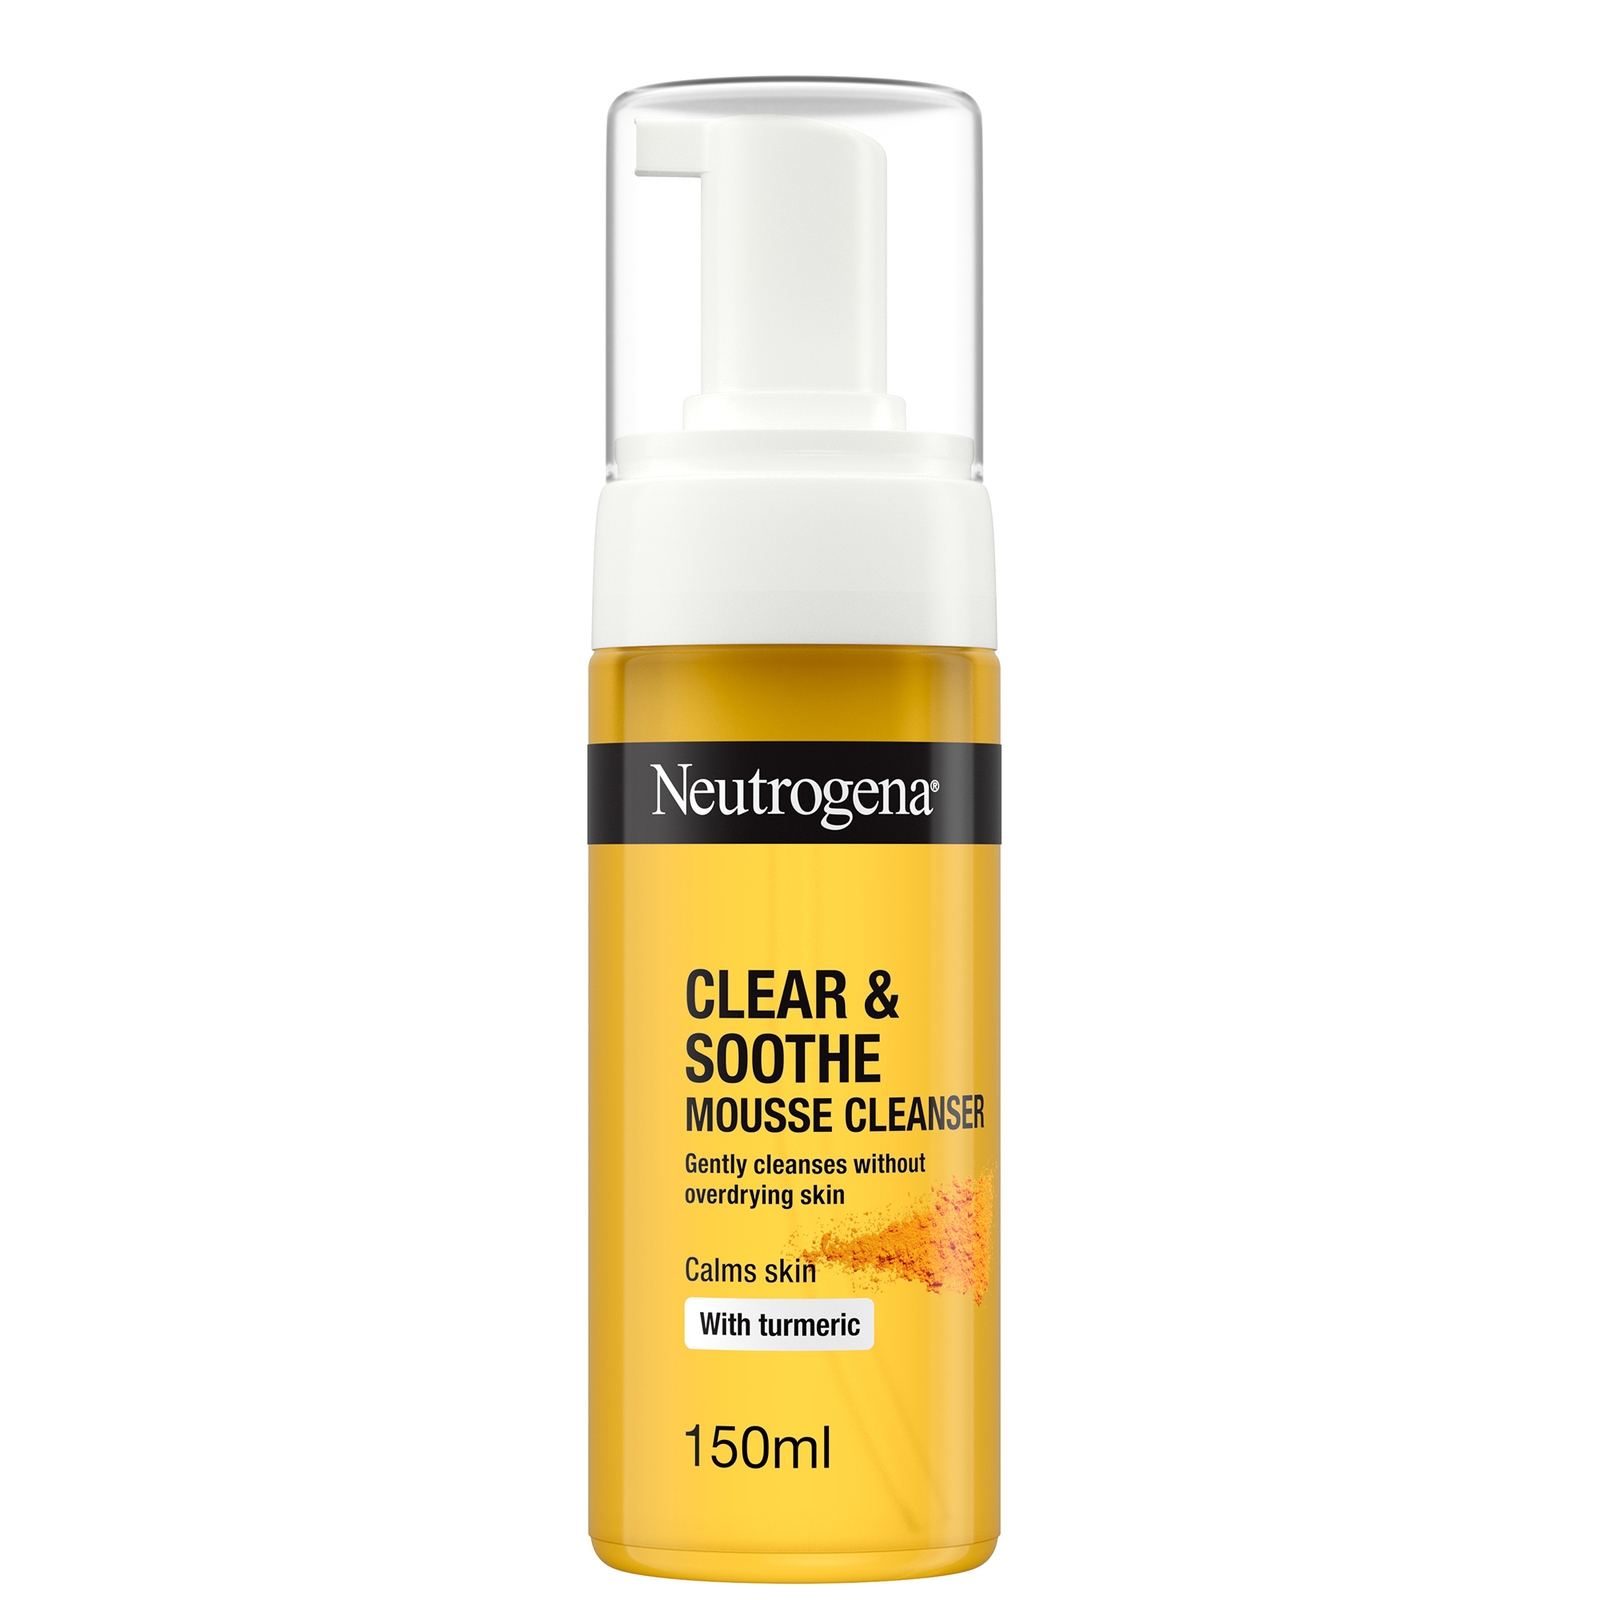 Photos - Facial / Body Cleansing Product Neutrogena Clear and Soothe Mousse Cleanser 150ml 17230 